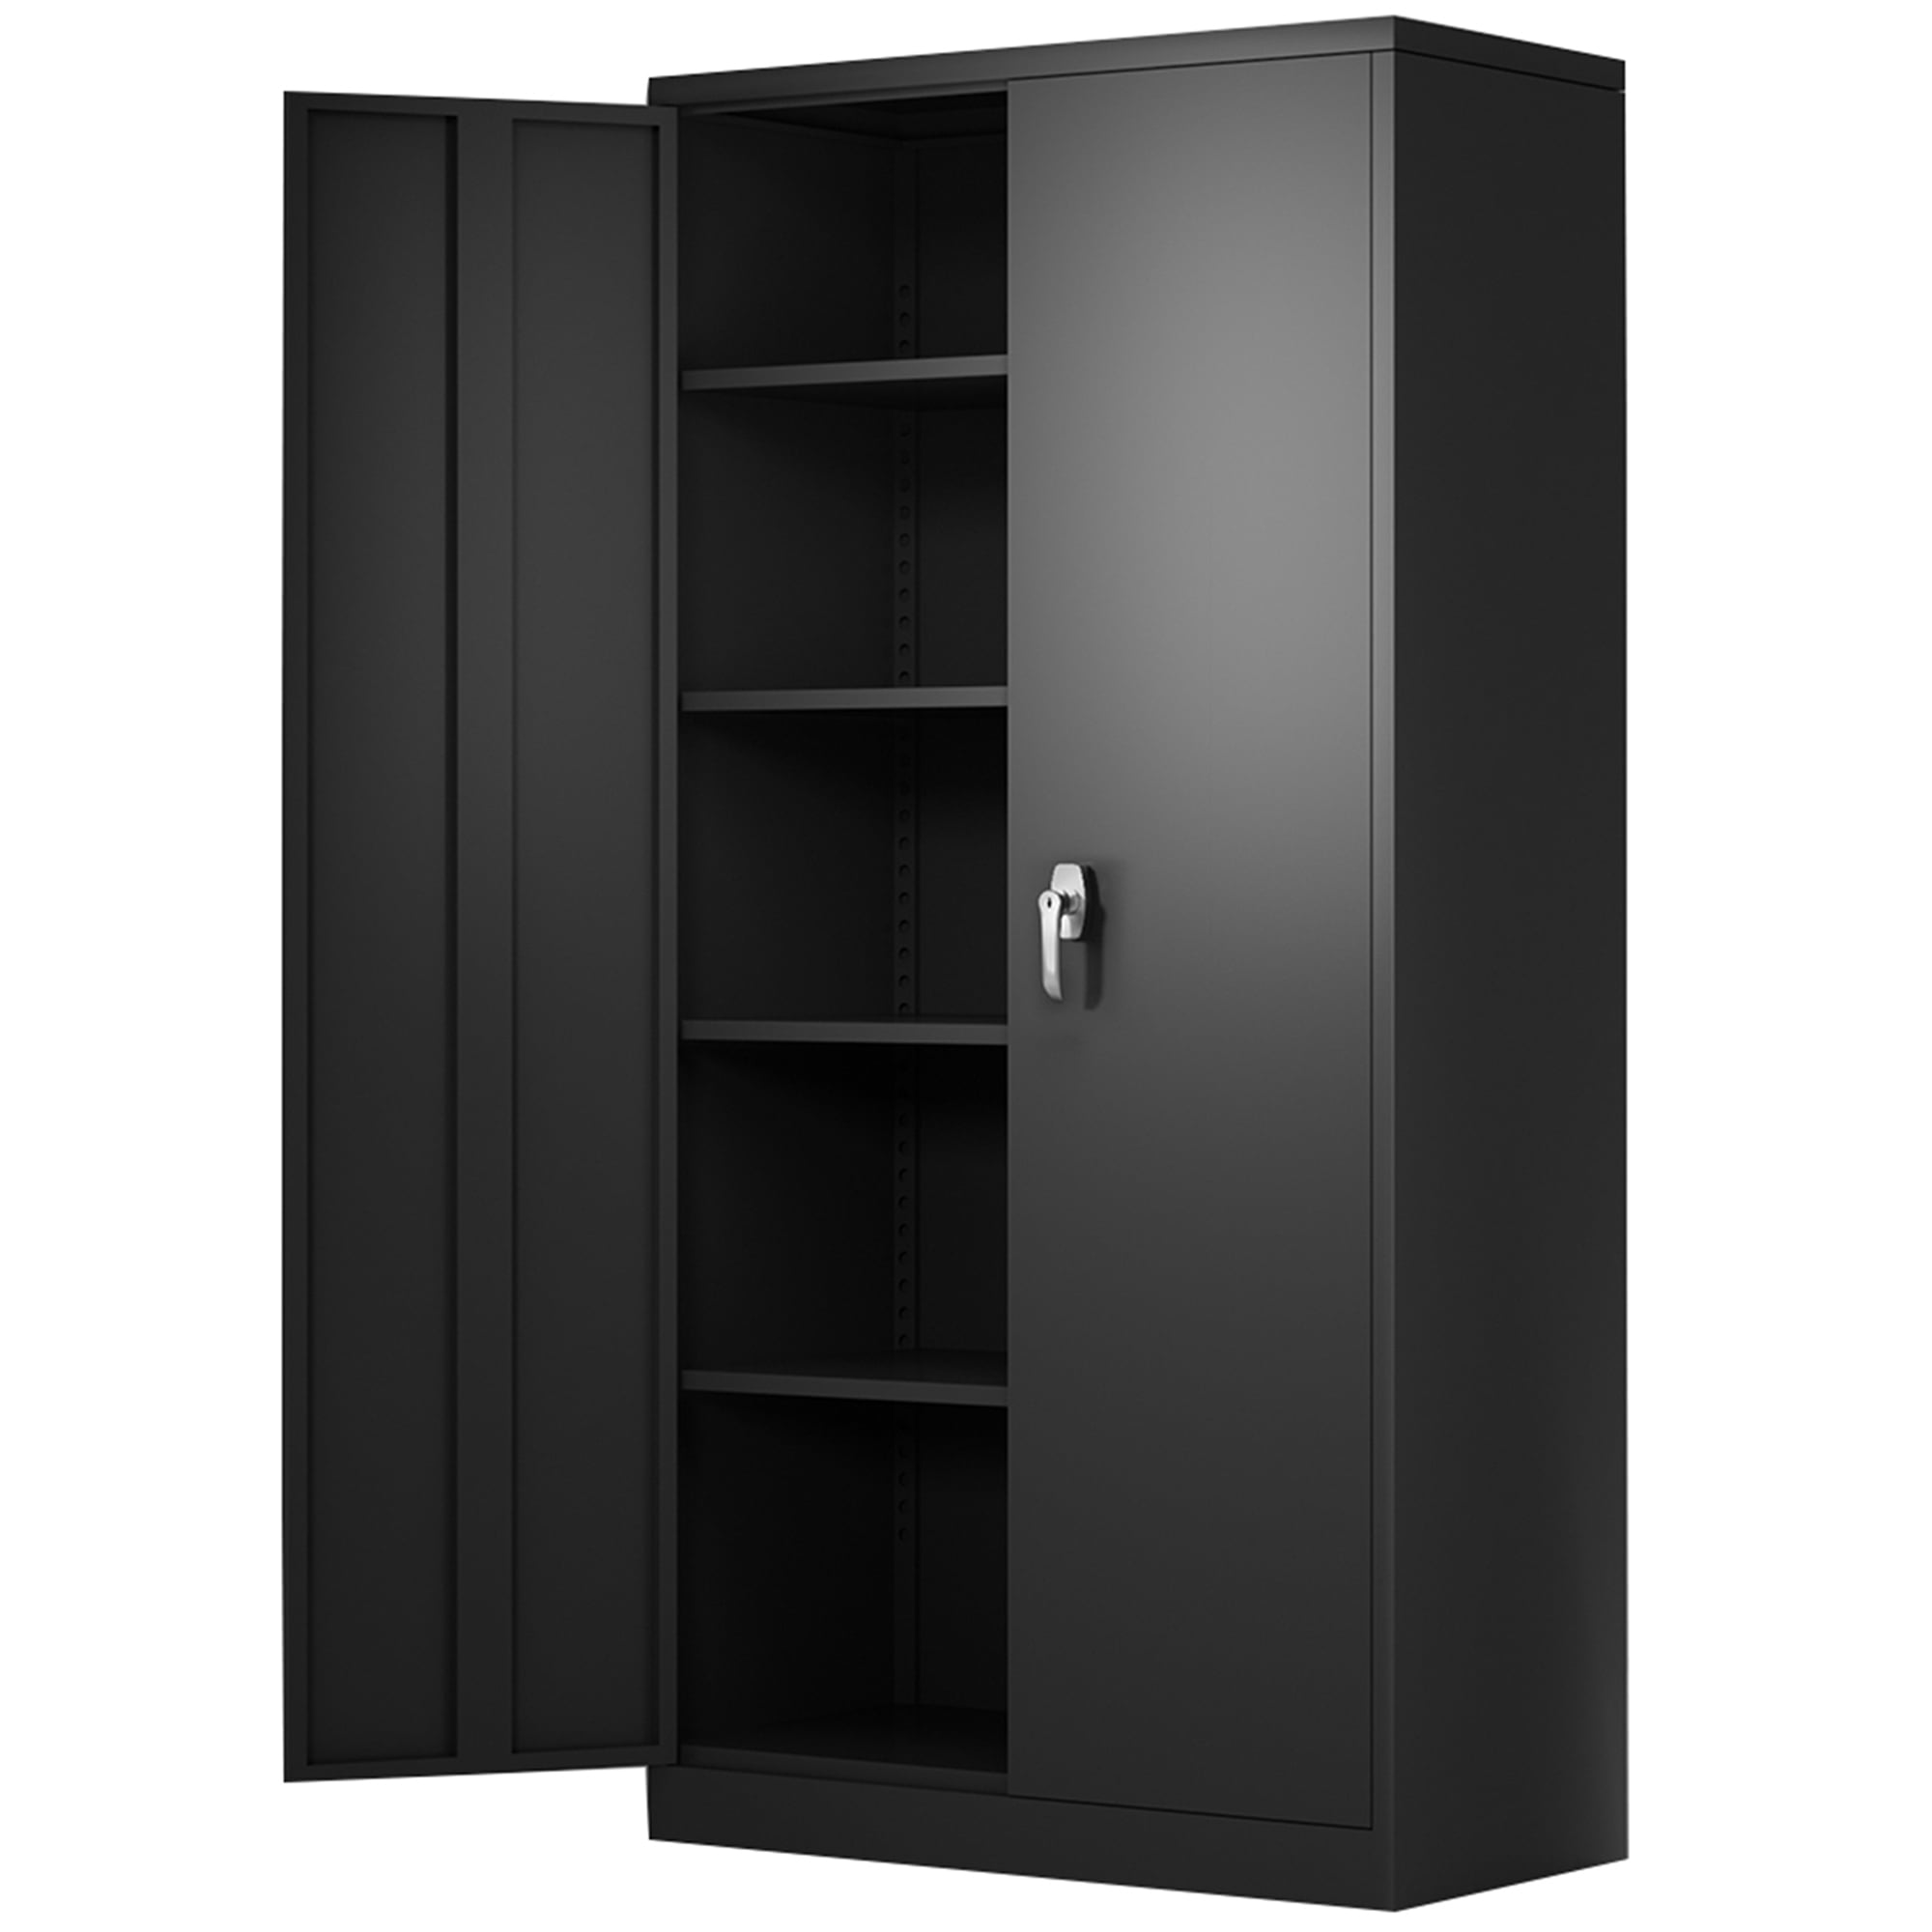 Lockable Double Doors and 1 Shelf White Desk High Cupboard Office Cupboard From the Smart Office Furniture Range 